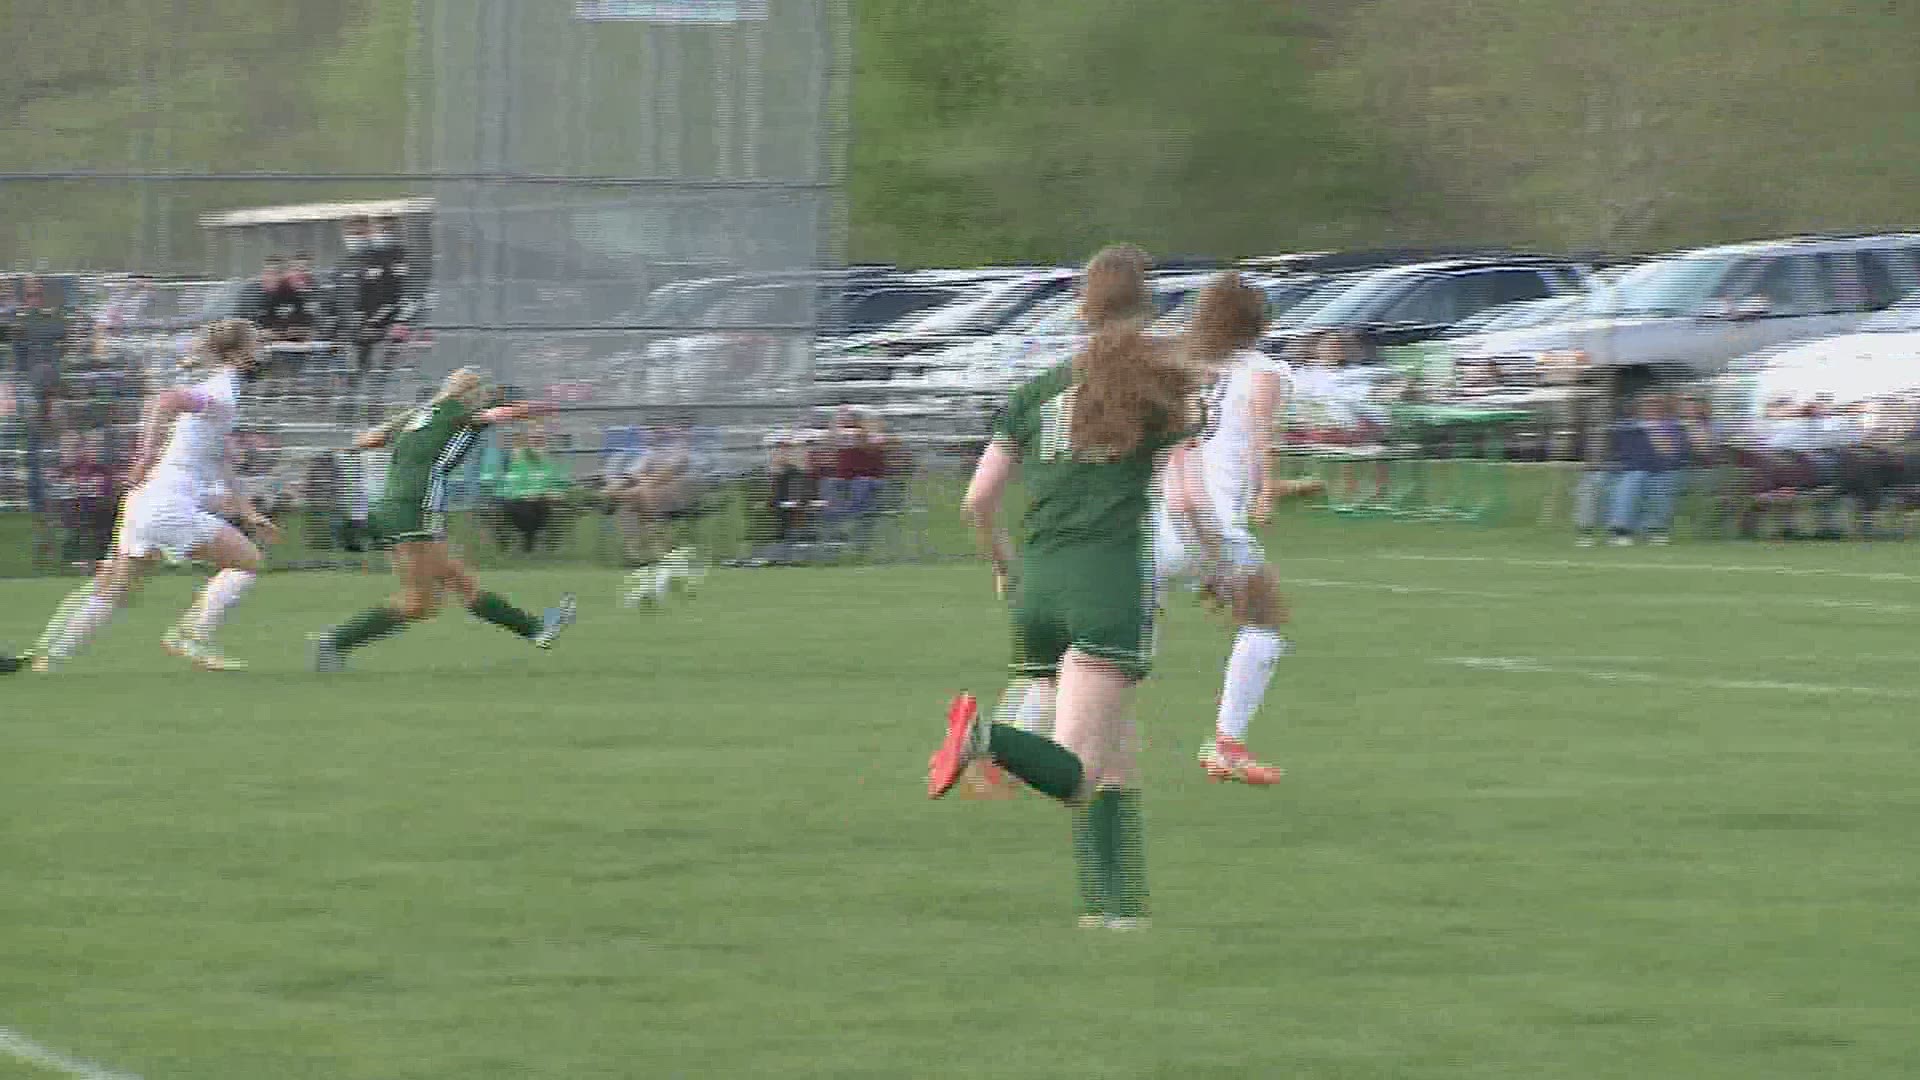 For the first time in school history, Alleman beats Moline in girls soccer.